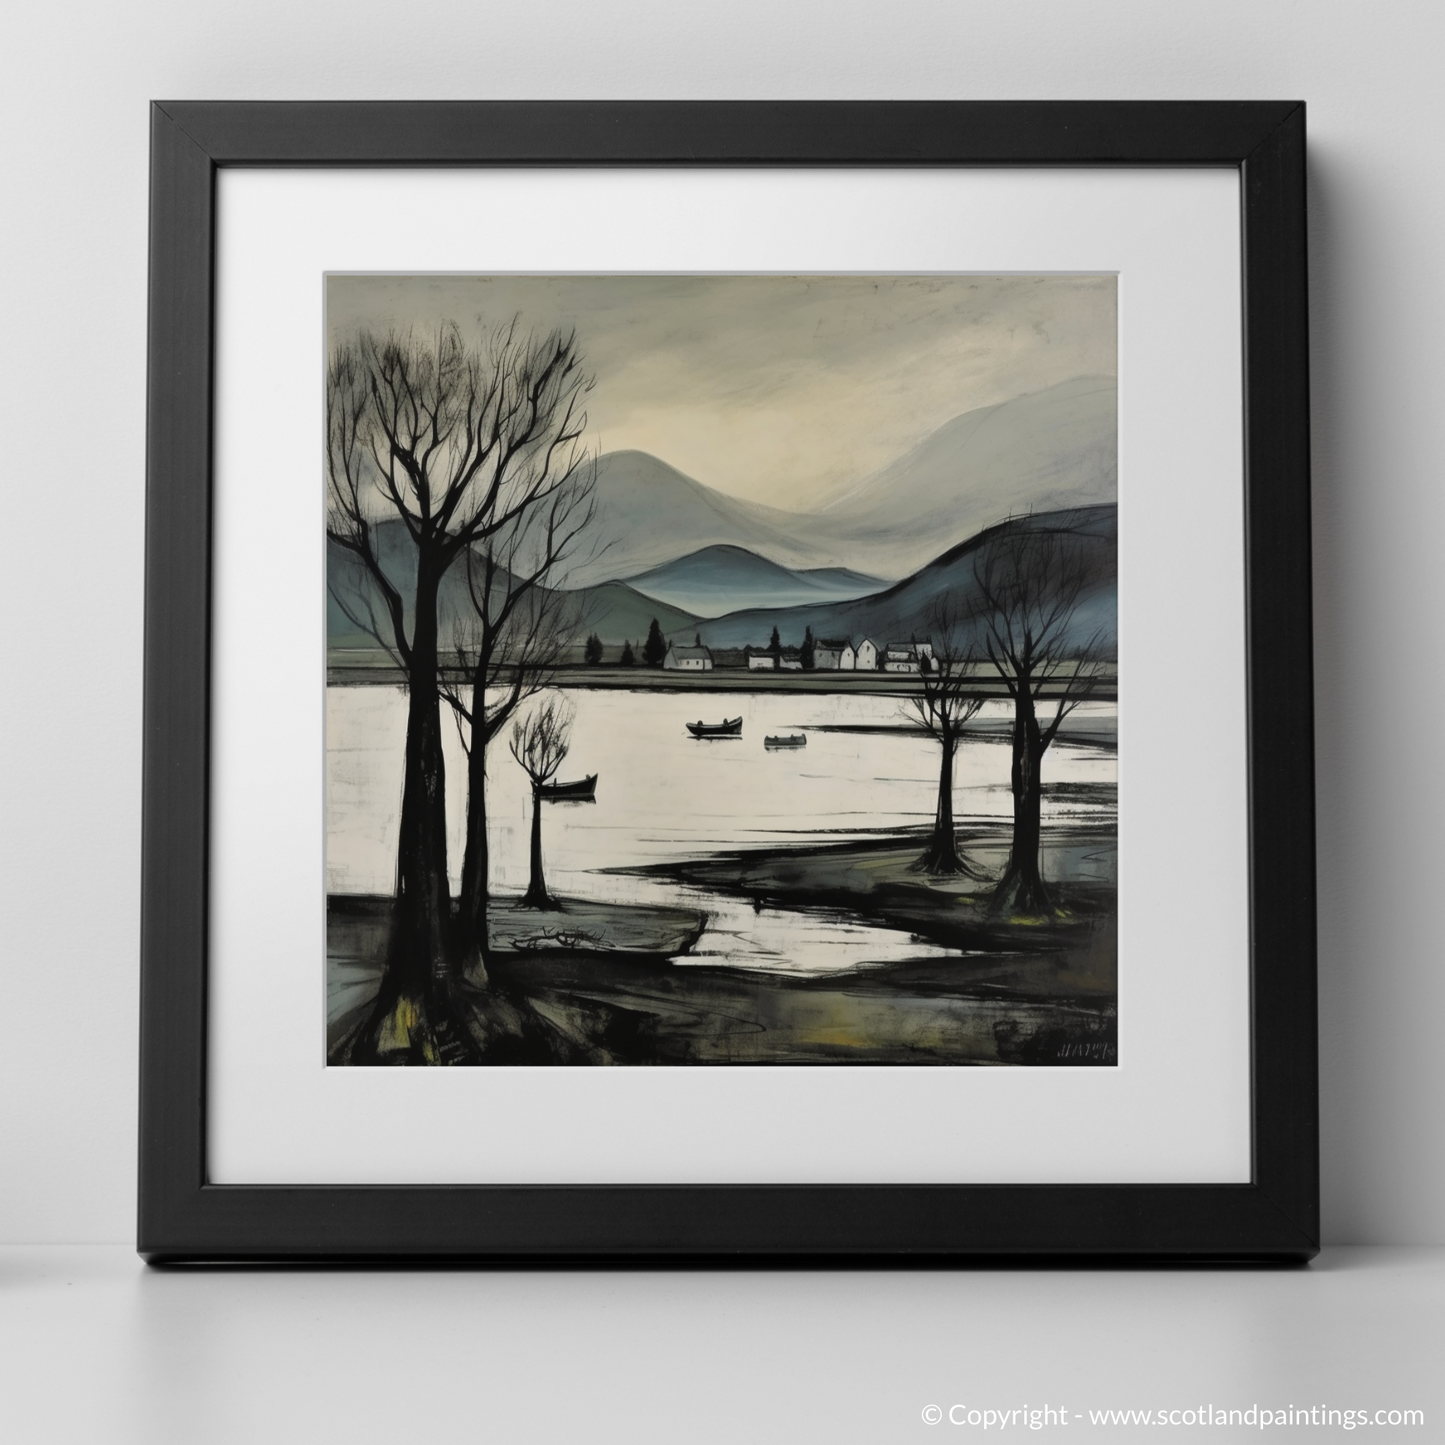 Art Print of Loch Awe, Argyll and Bute with a black frame